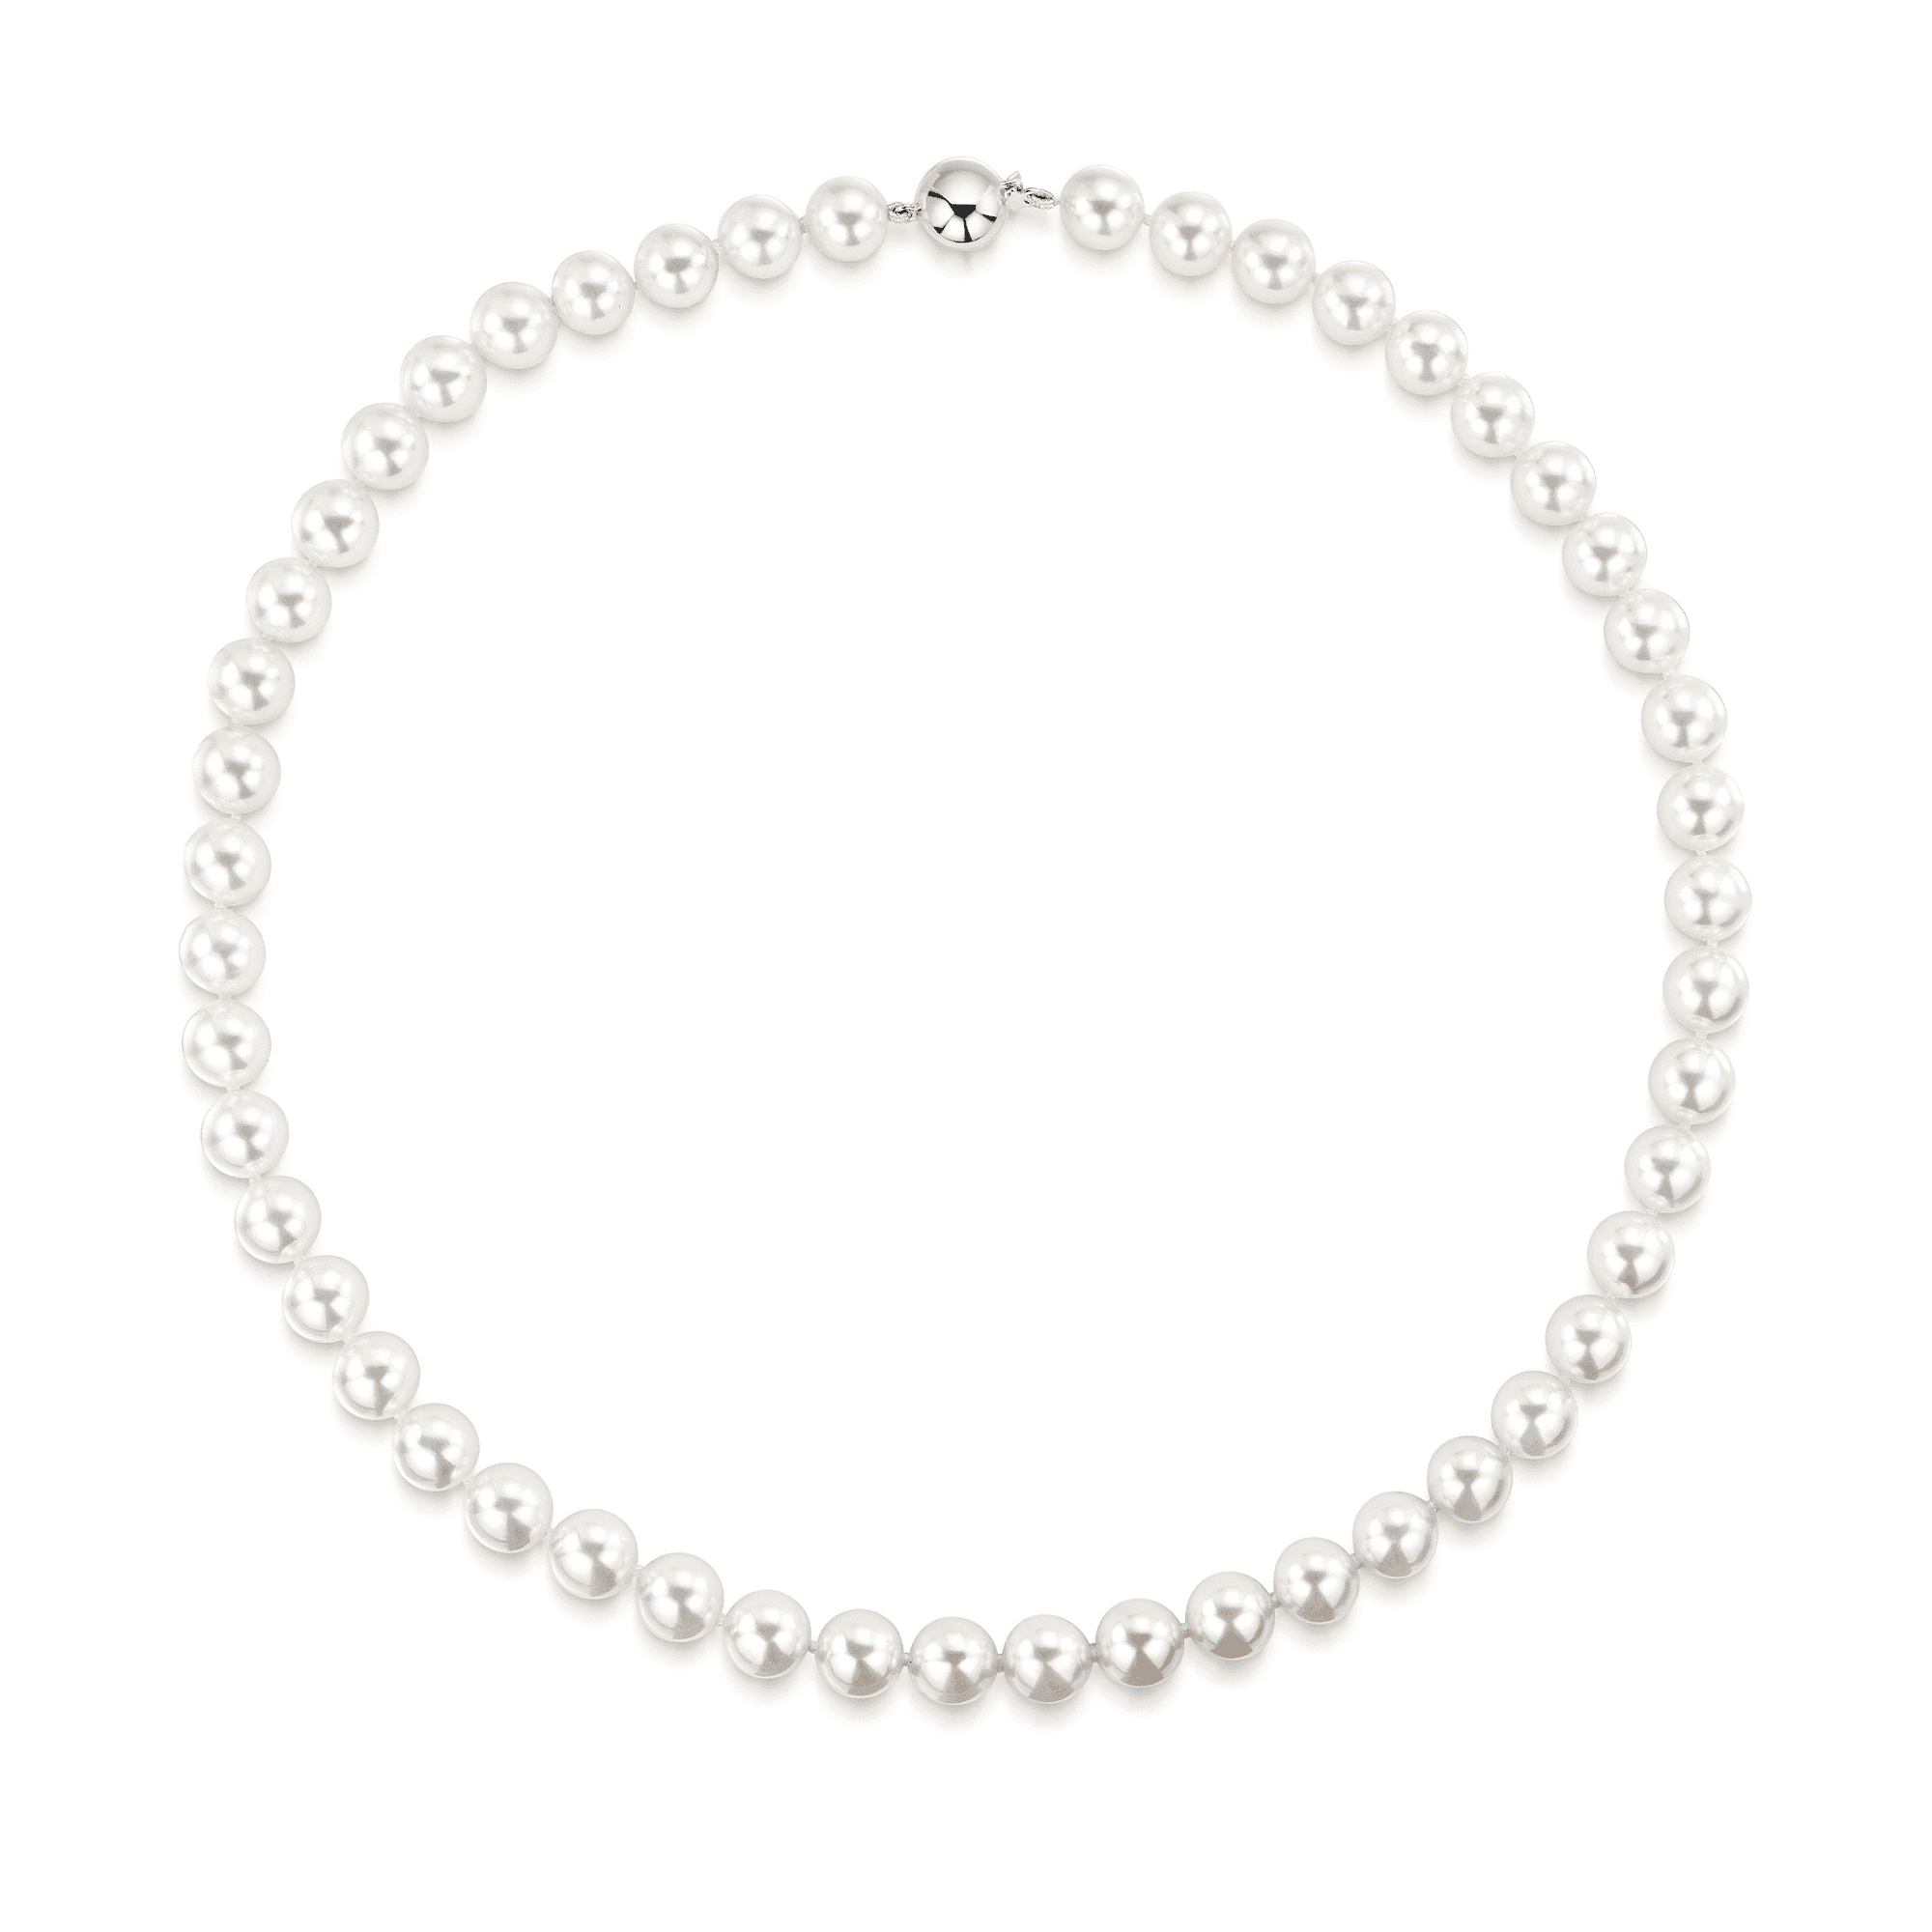 Akoya Cultured Pear Single Row Necklet on 18ct White Gold Plain Ball Clasp